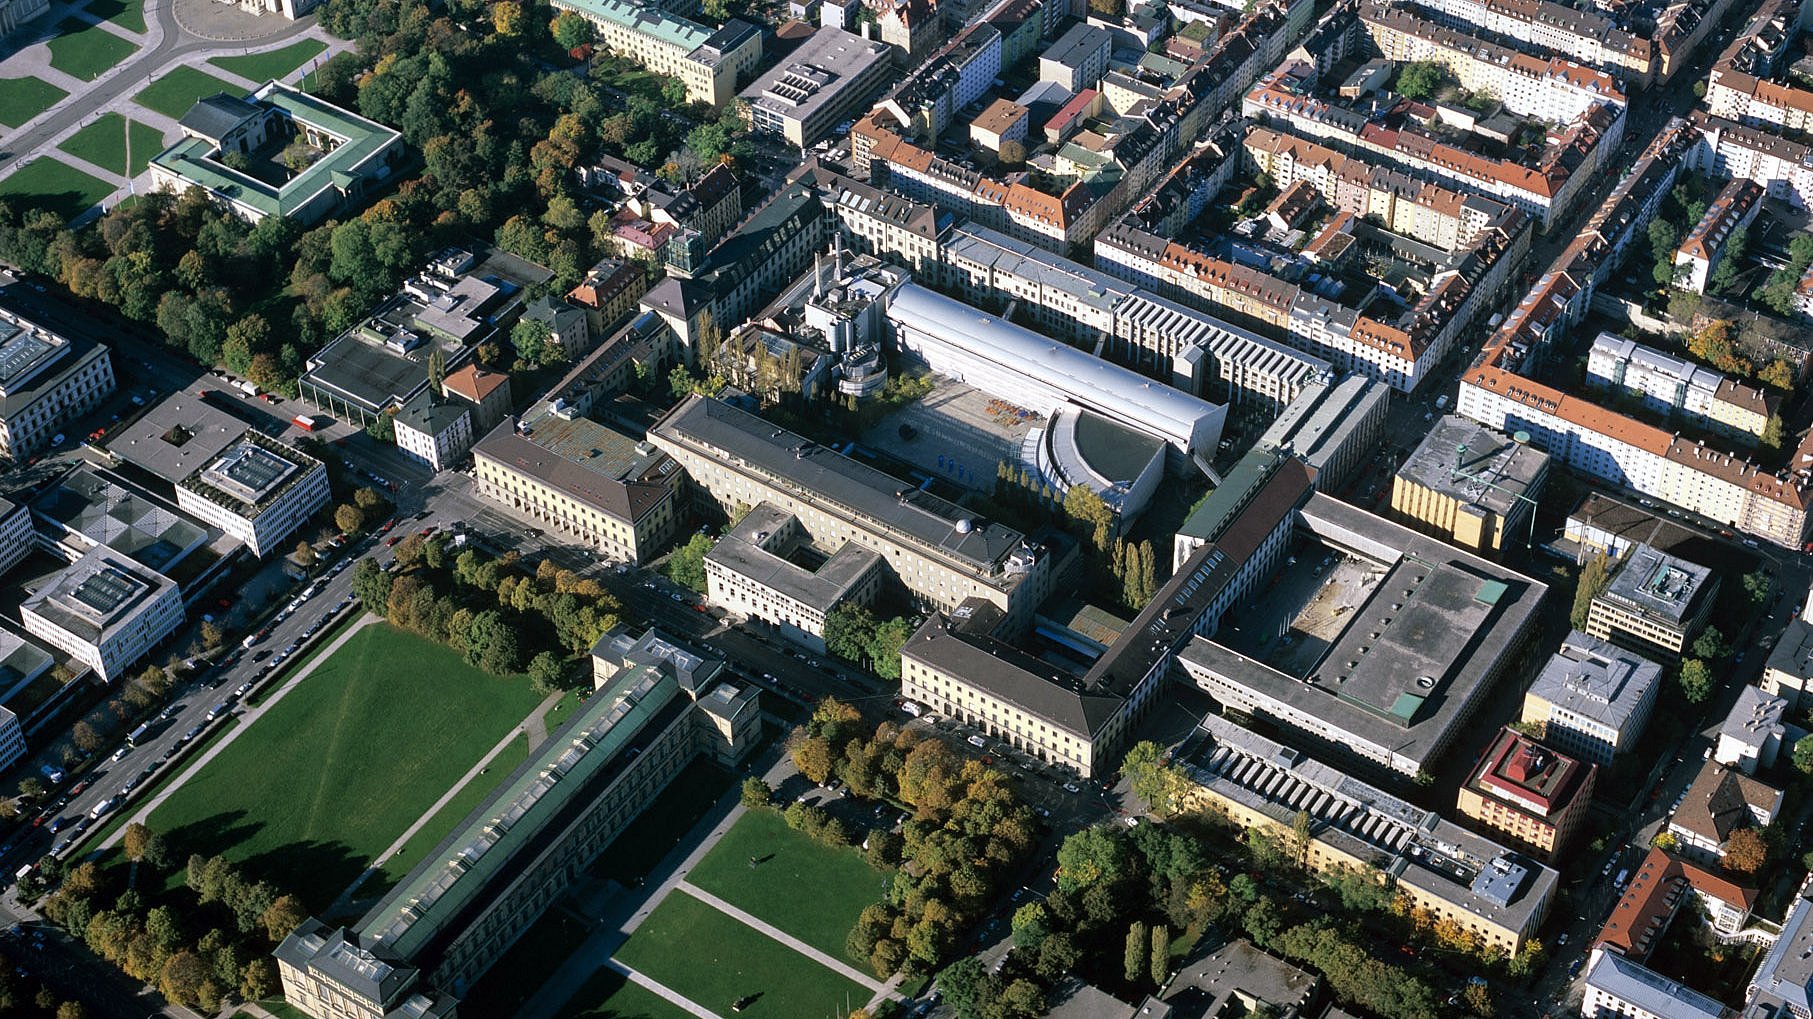 Aerial view of the main TUM campus in Munich city center in 2013.